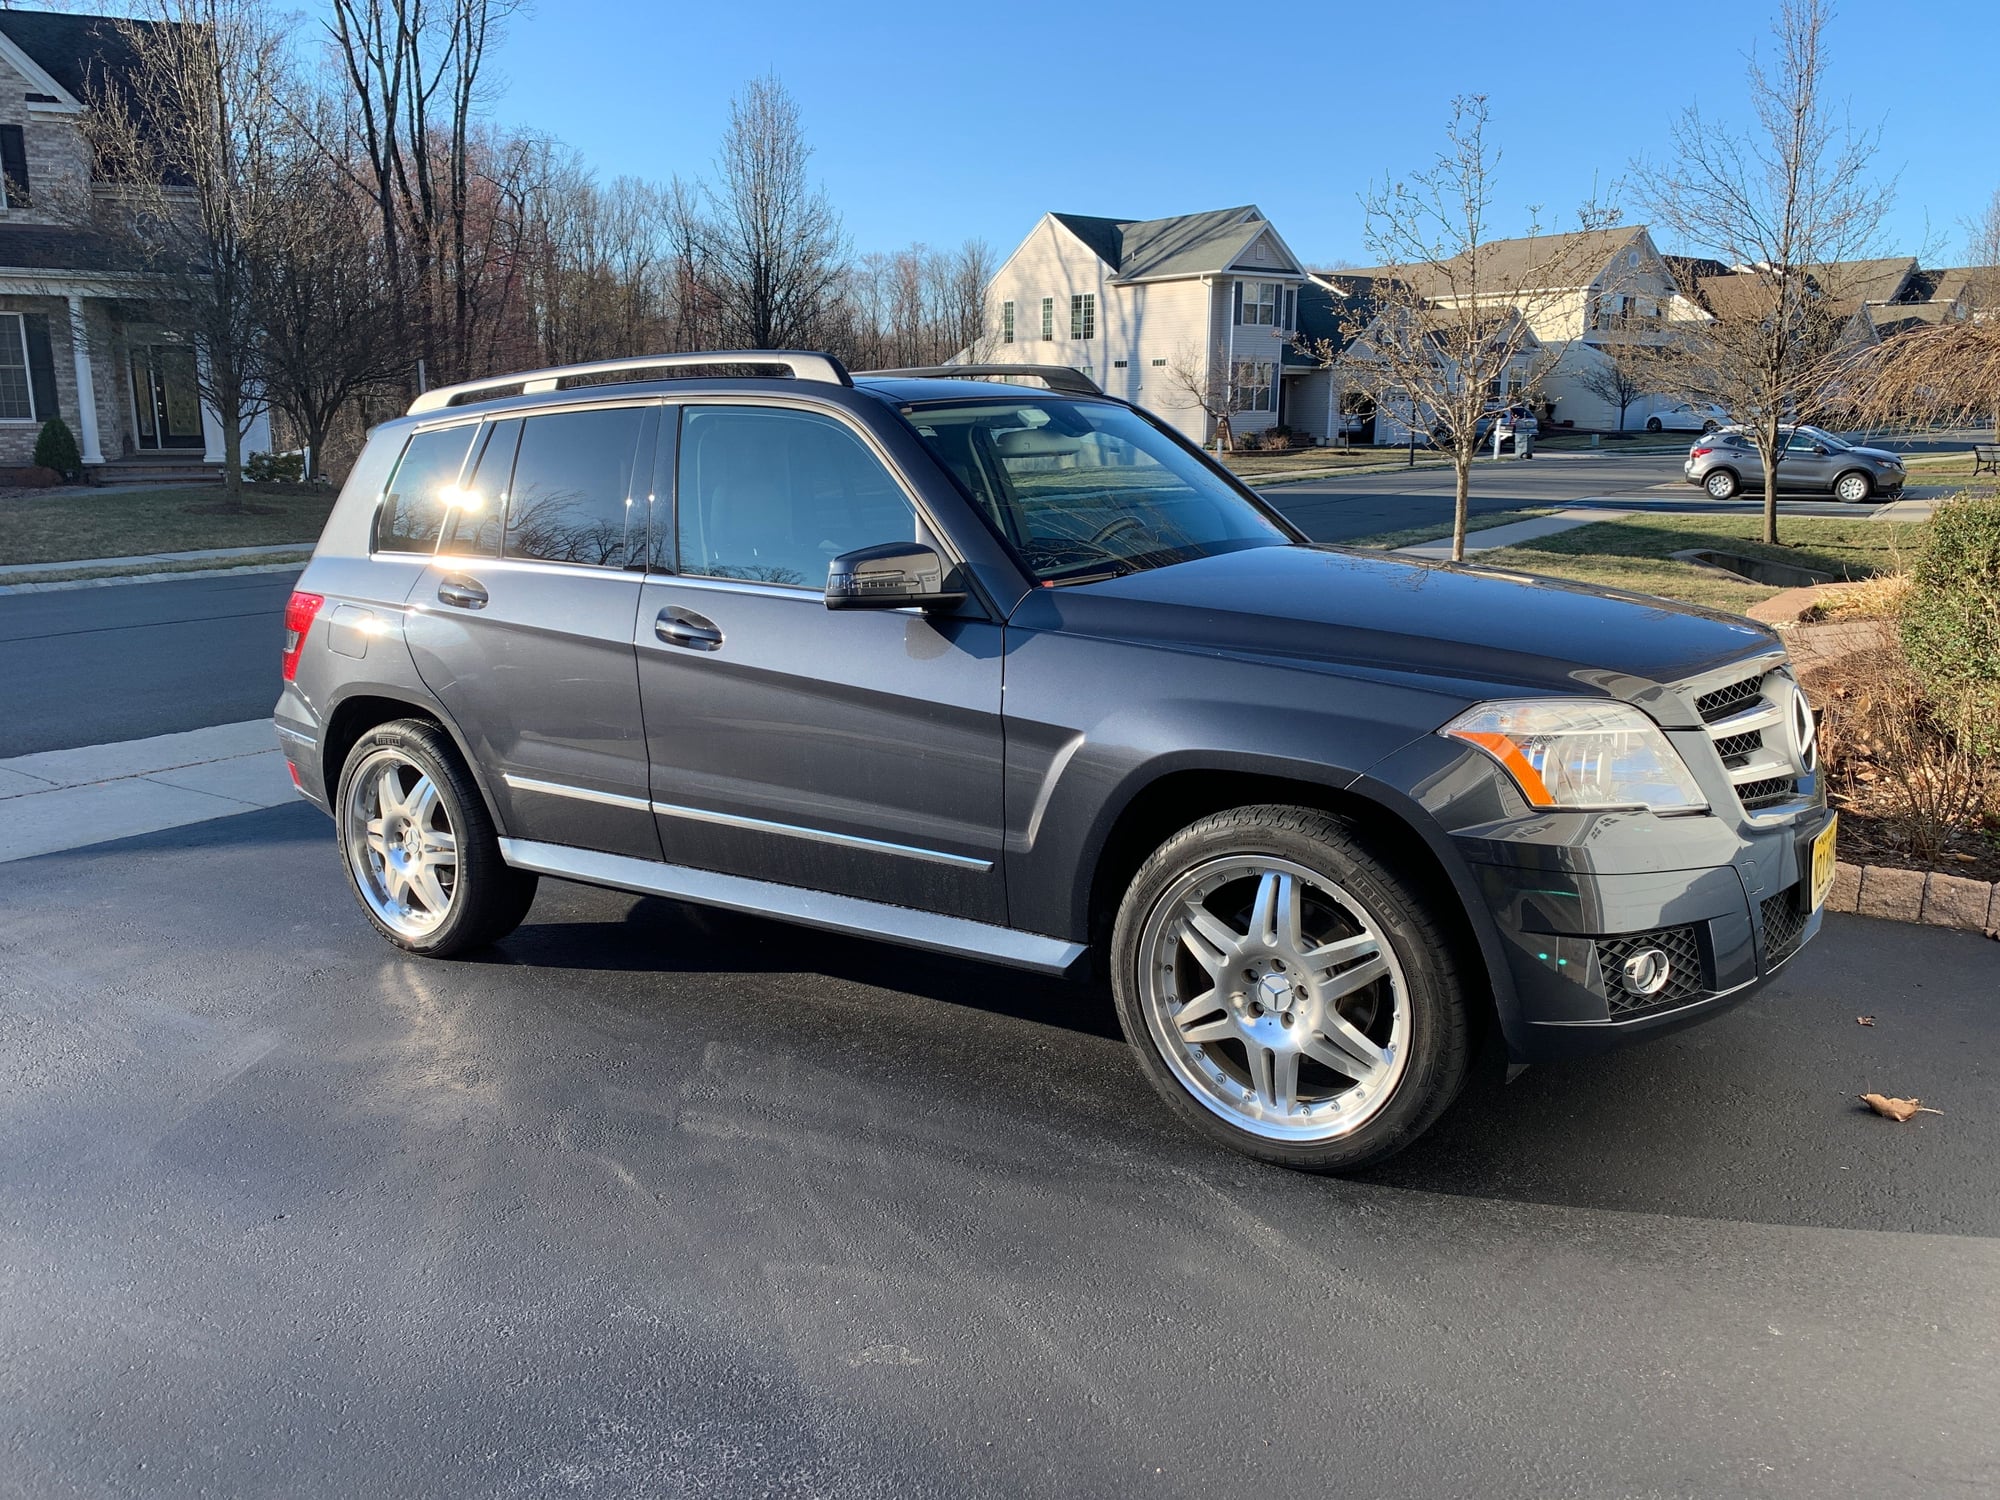 Wheels and Tires/Axles - Mercedes GLK350 4matic 20" Sport Wheels and tires - Used - 2010 Mercedes-Benz GLK350 - Kendall Park, NJ 08824, United States